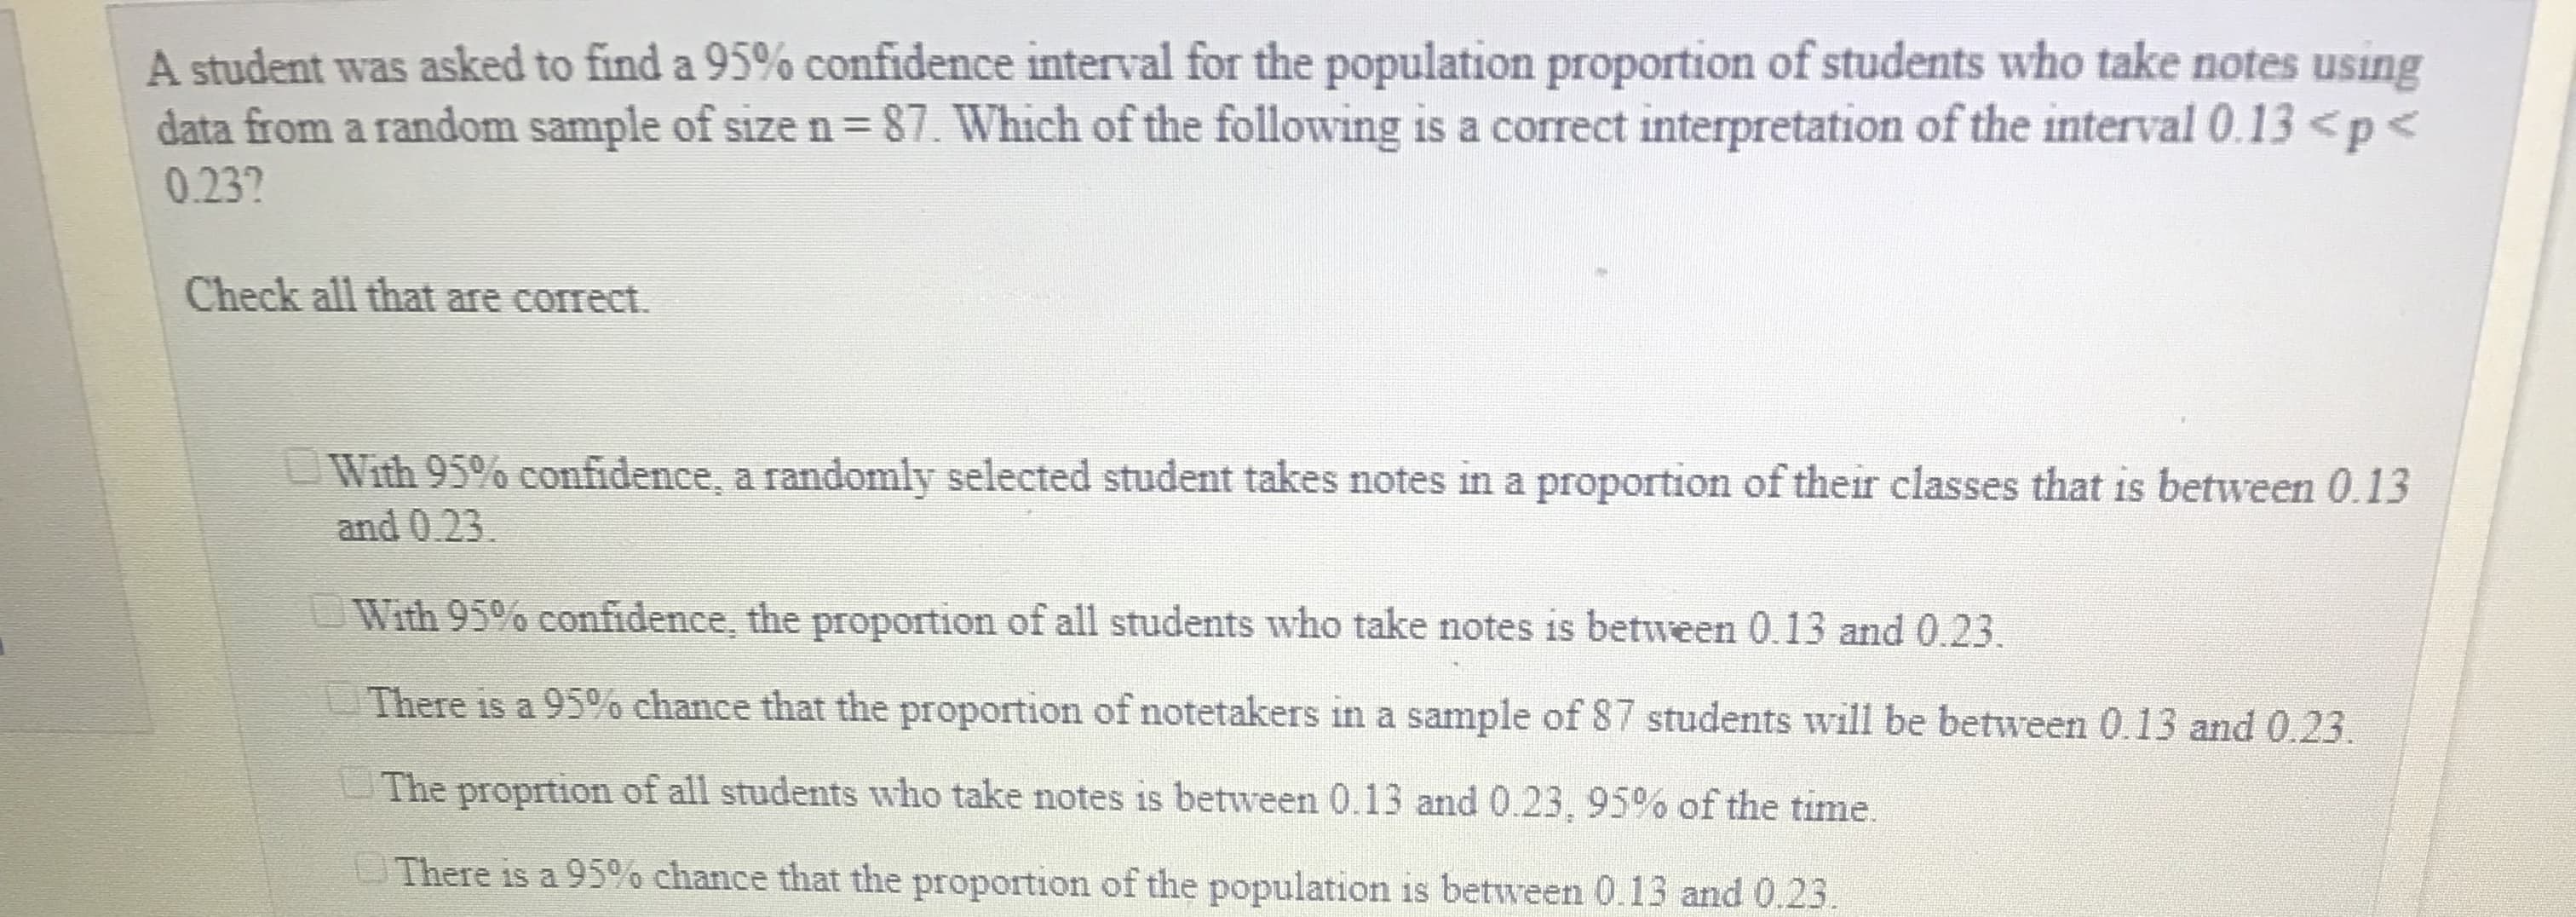 A student was asked to find a 95% confidence interval for the population proportion of students who take notes using
data from a random sample of size n-87. Which of the following is a correct interpretation of the interval 0.13 <p <
0.23?
Check all that are correct.
With 95% confidence, a randomly selected student takes notes in a proportion of their classes that is between 0.13
and 0.23
With 95% confidence, the proportion of all students who take notes is between 0.13 and 0.23.
-There is a 95% chance that the proportion of notetakers in a sample of 87 students will be between 0.13 and 0.23
The proprtion of all students who take notes is between 0.13 and 0.23, 95% of the time.
There is a 95% chance that the proportion of the population is between 013 and 023.
